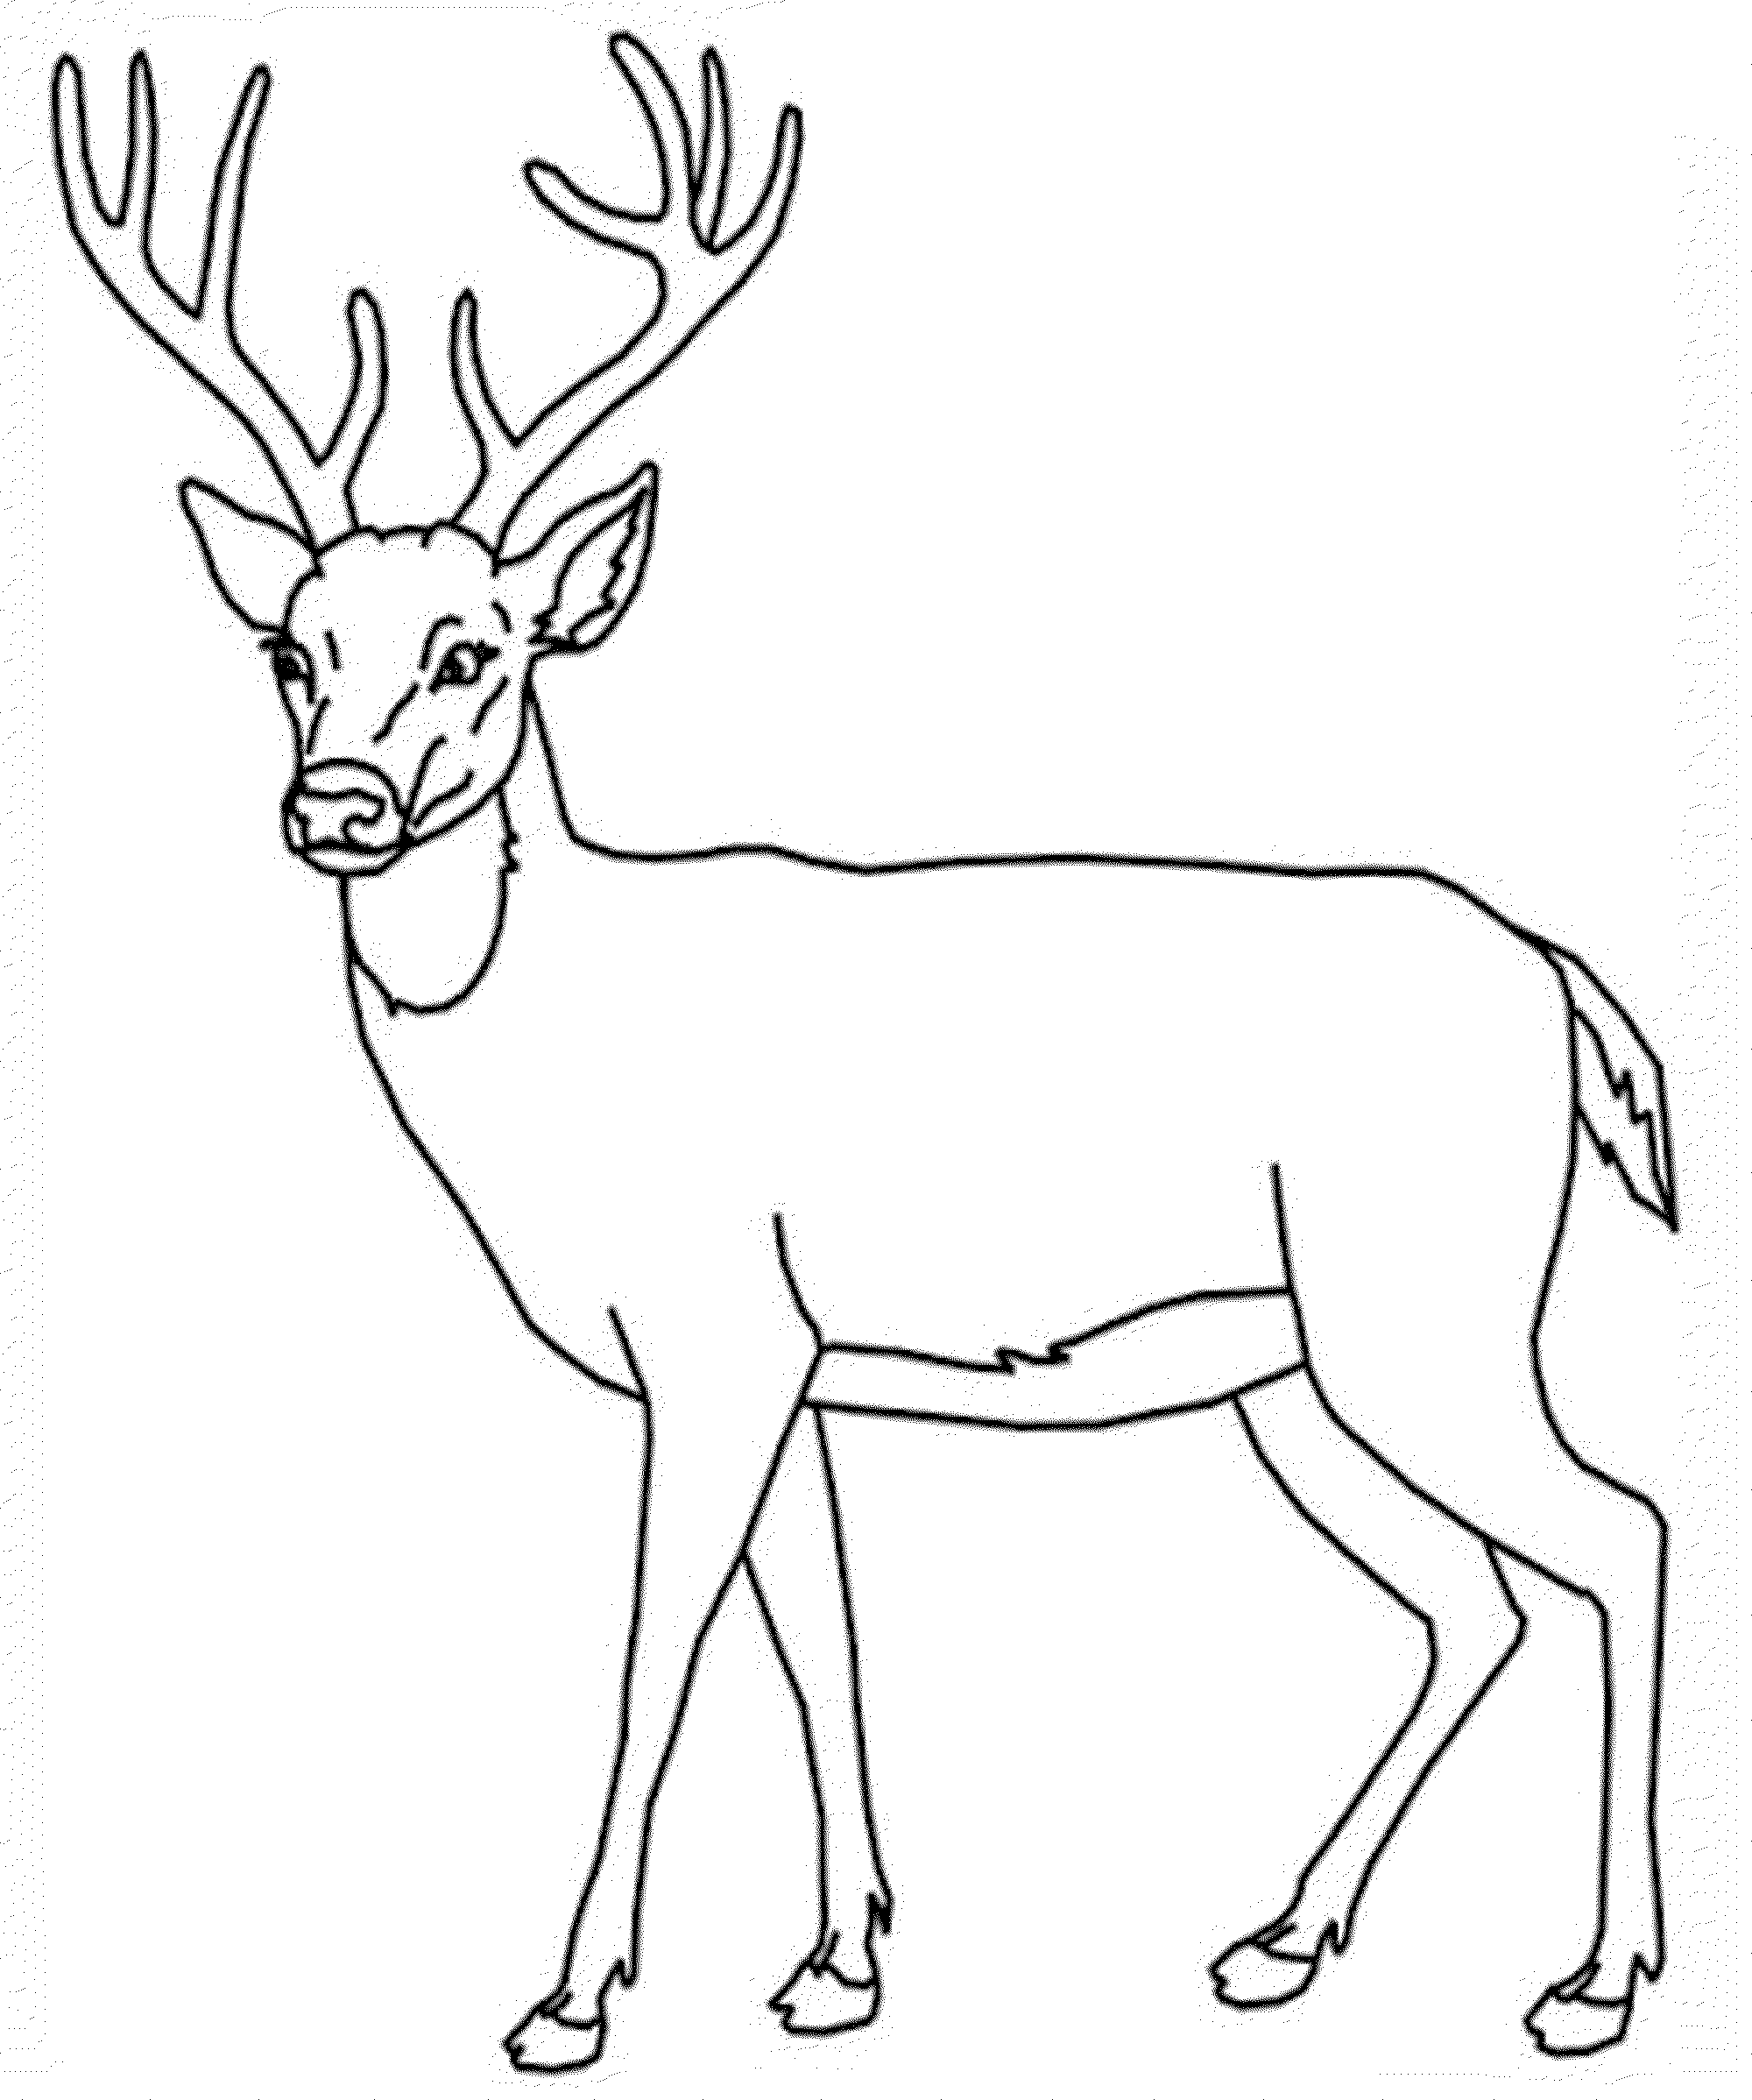 Coloring page: Deer (Animals) #2594 - Printable coloring pages